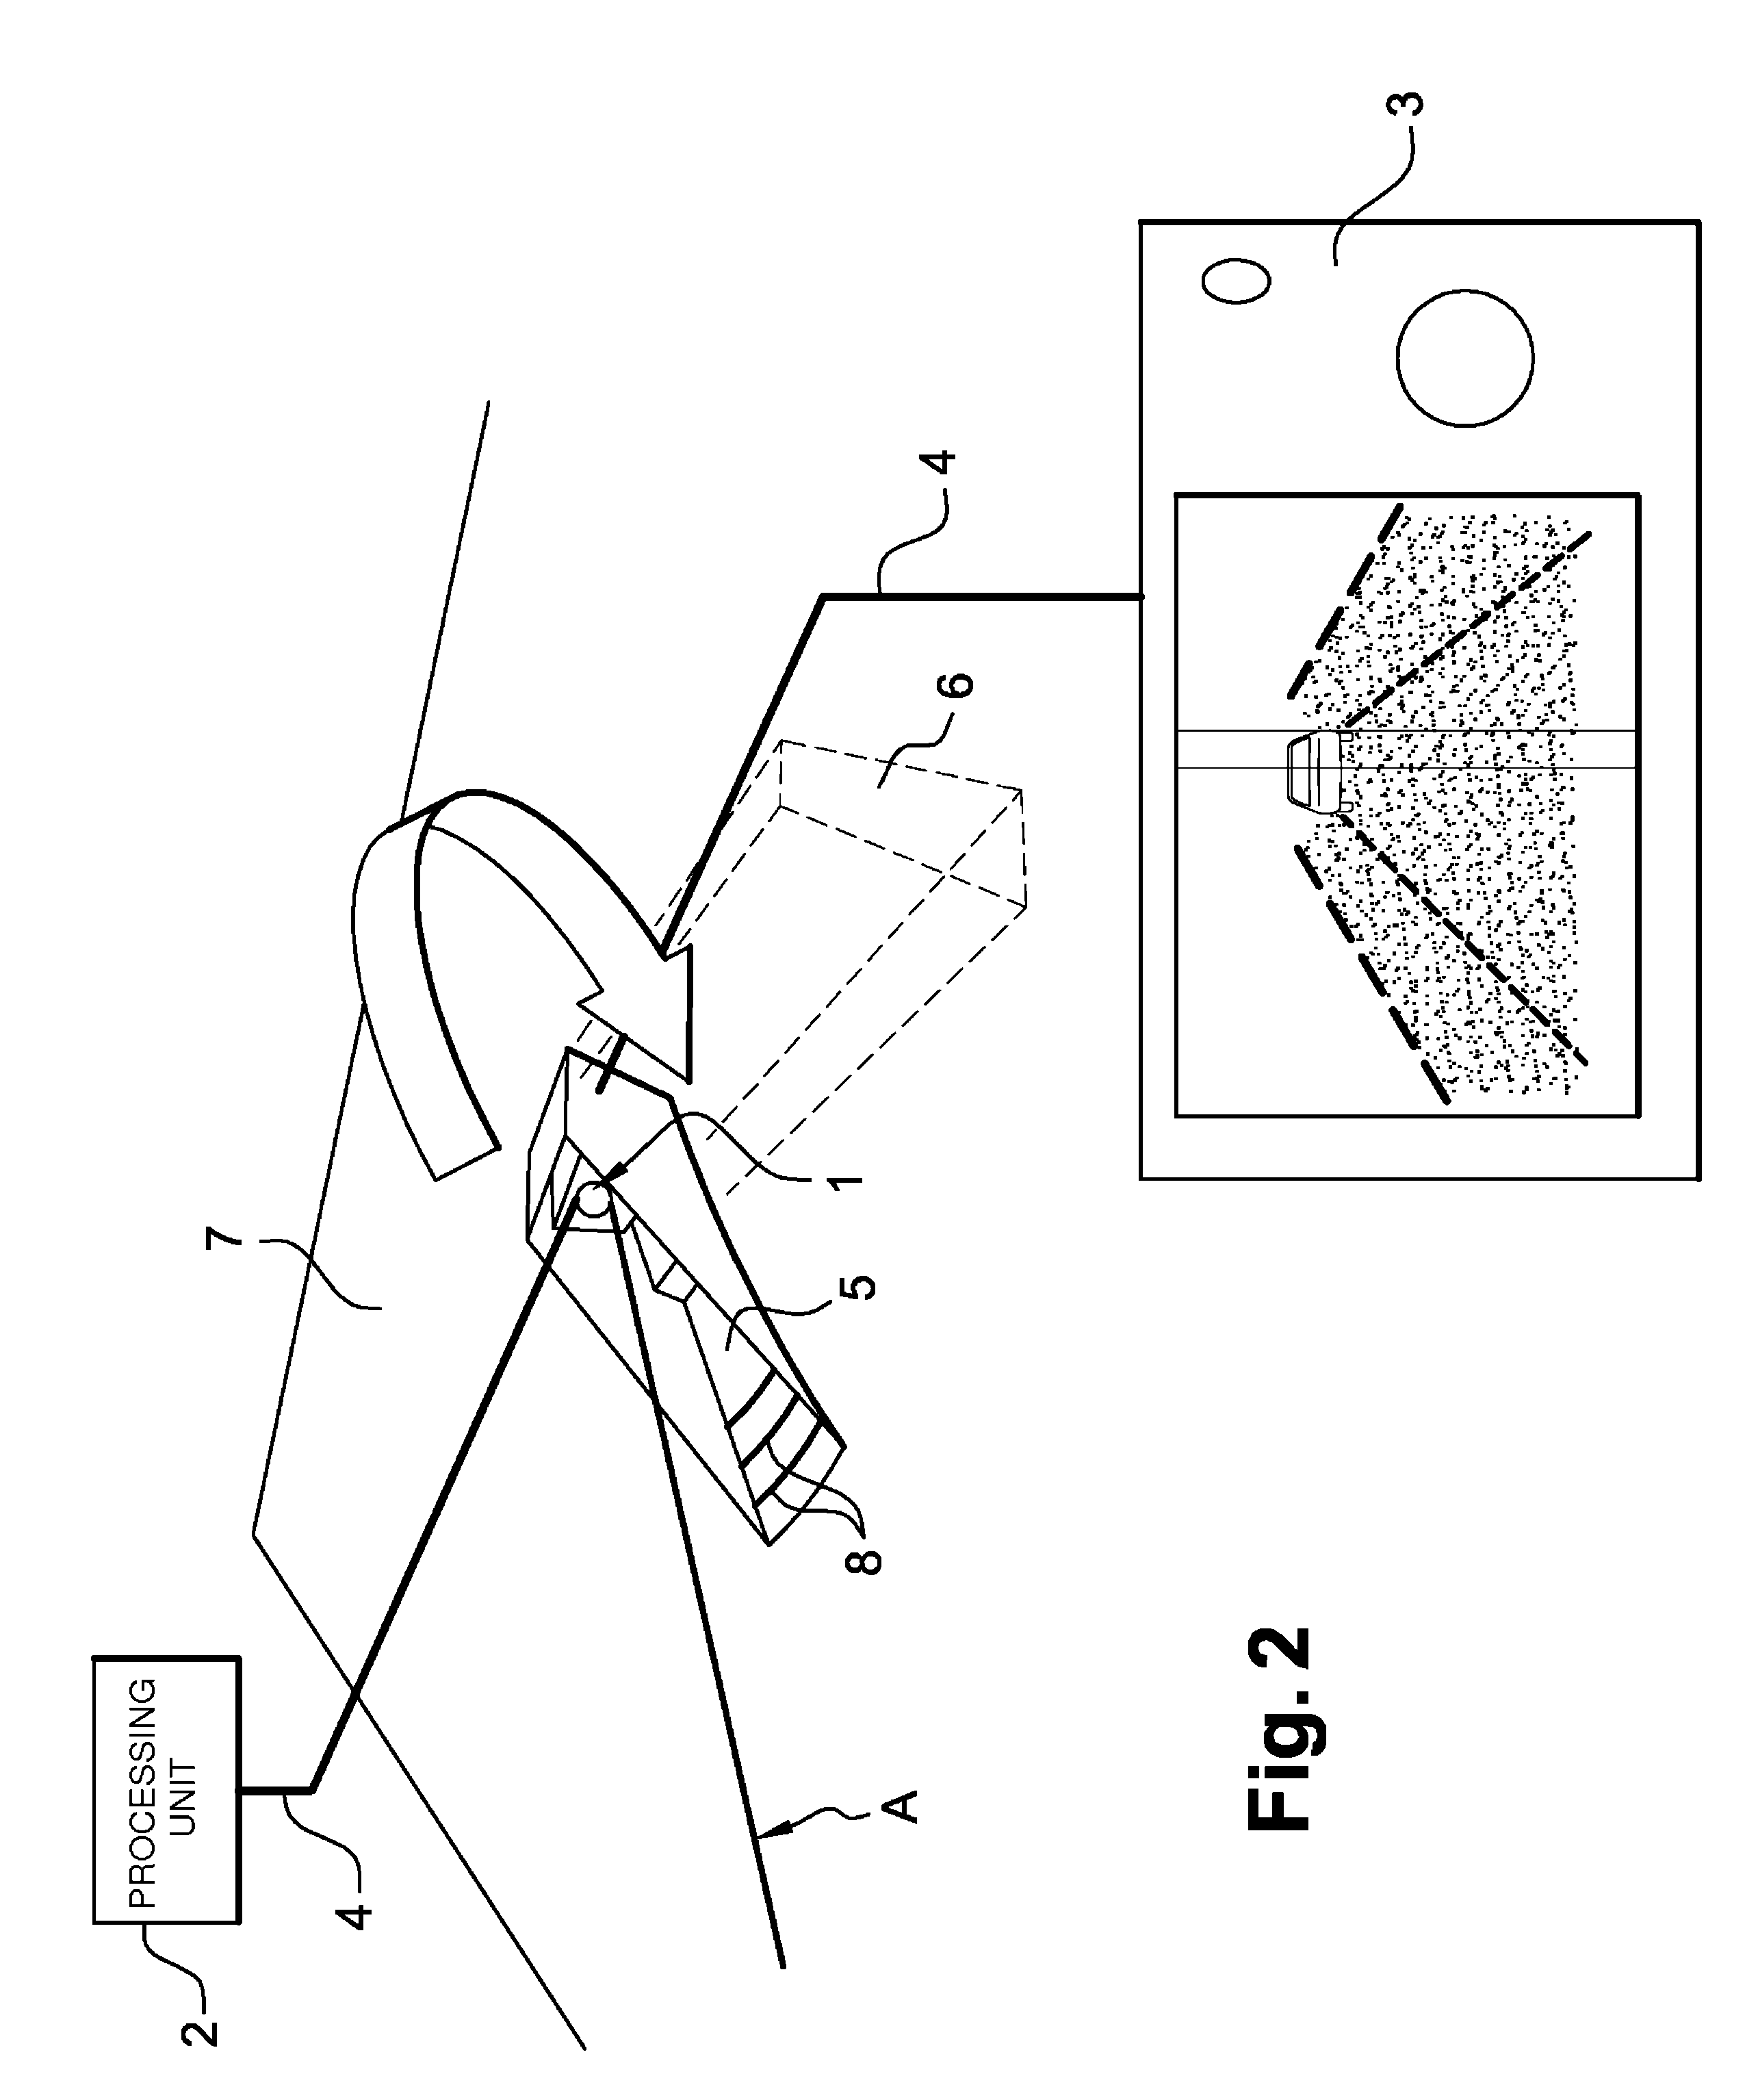 Method for adjusting the orientation of a camera installed in a vehicle and system for carrying out this method